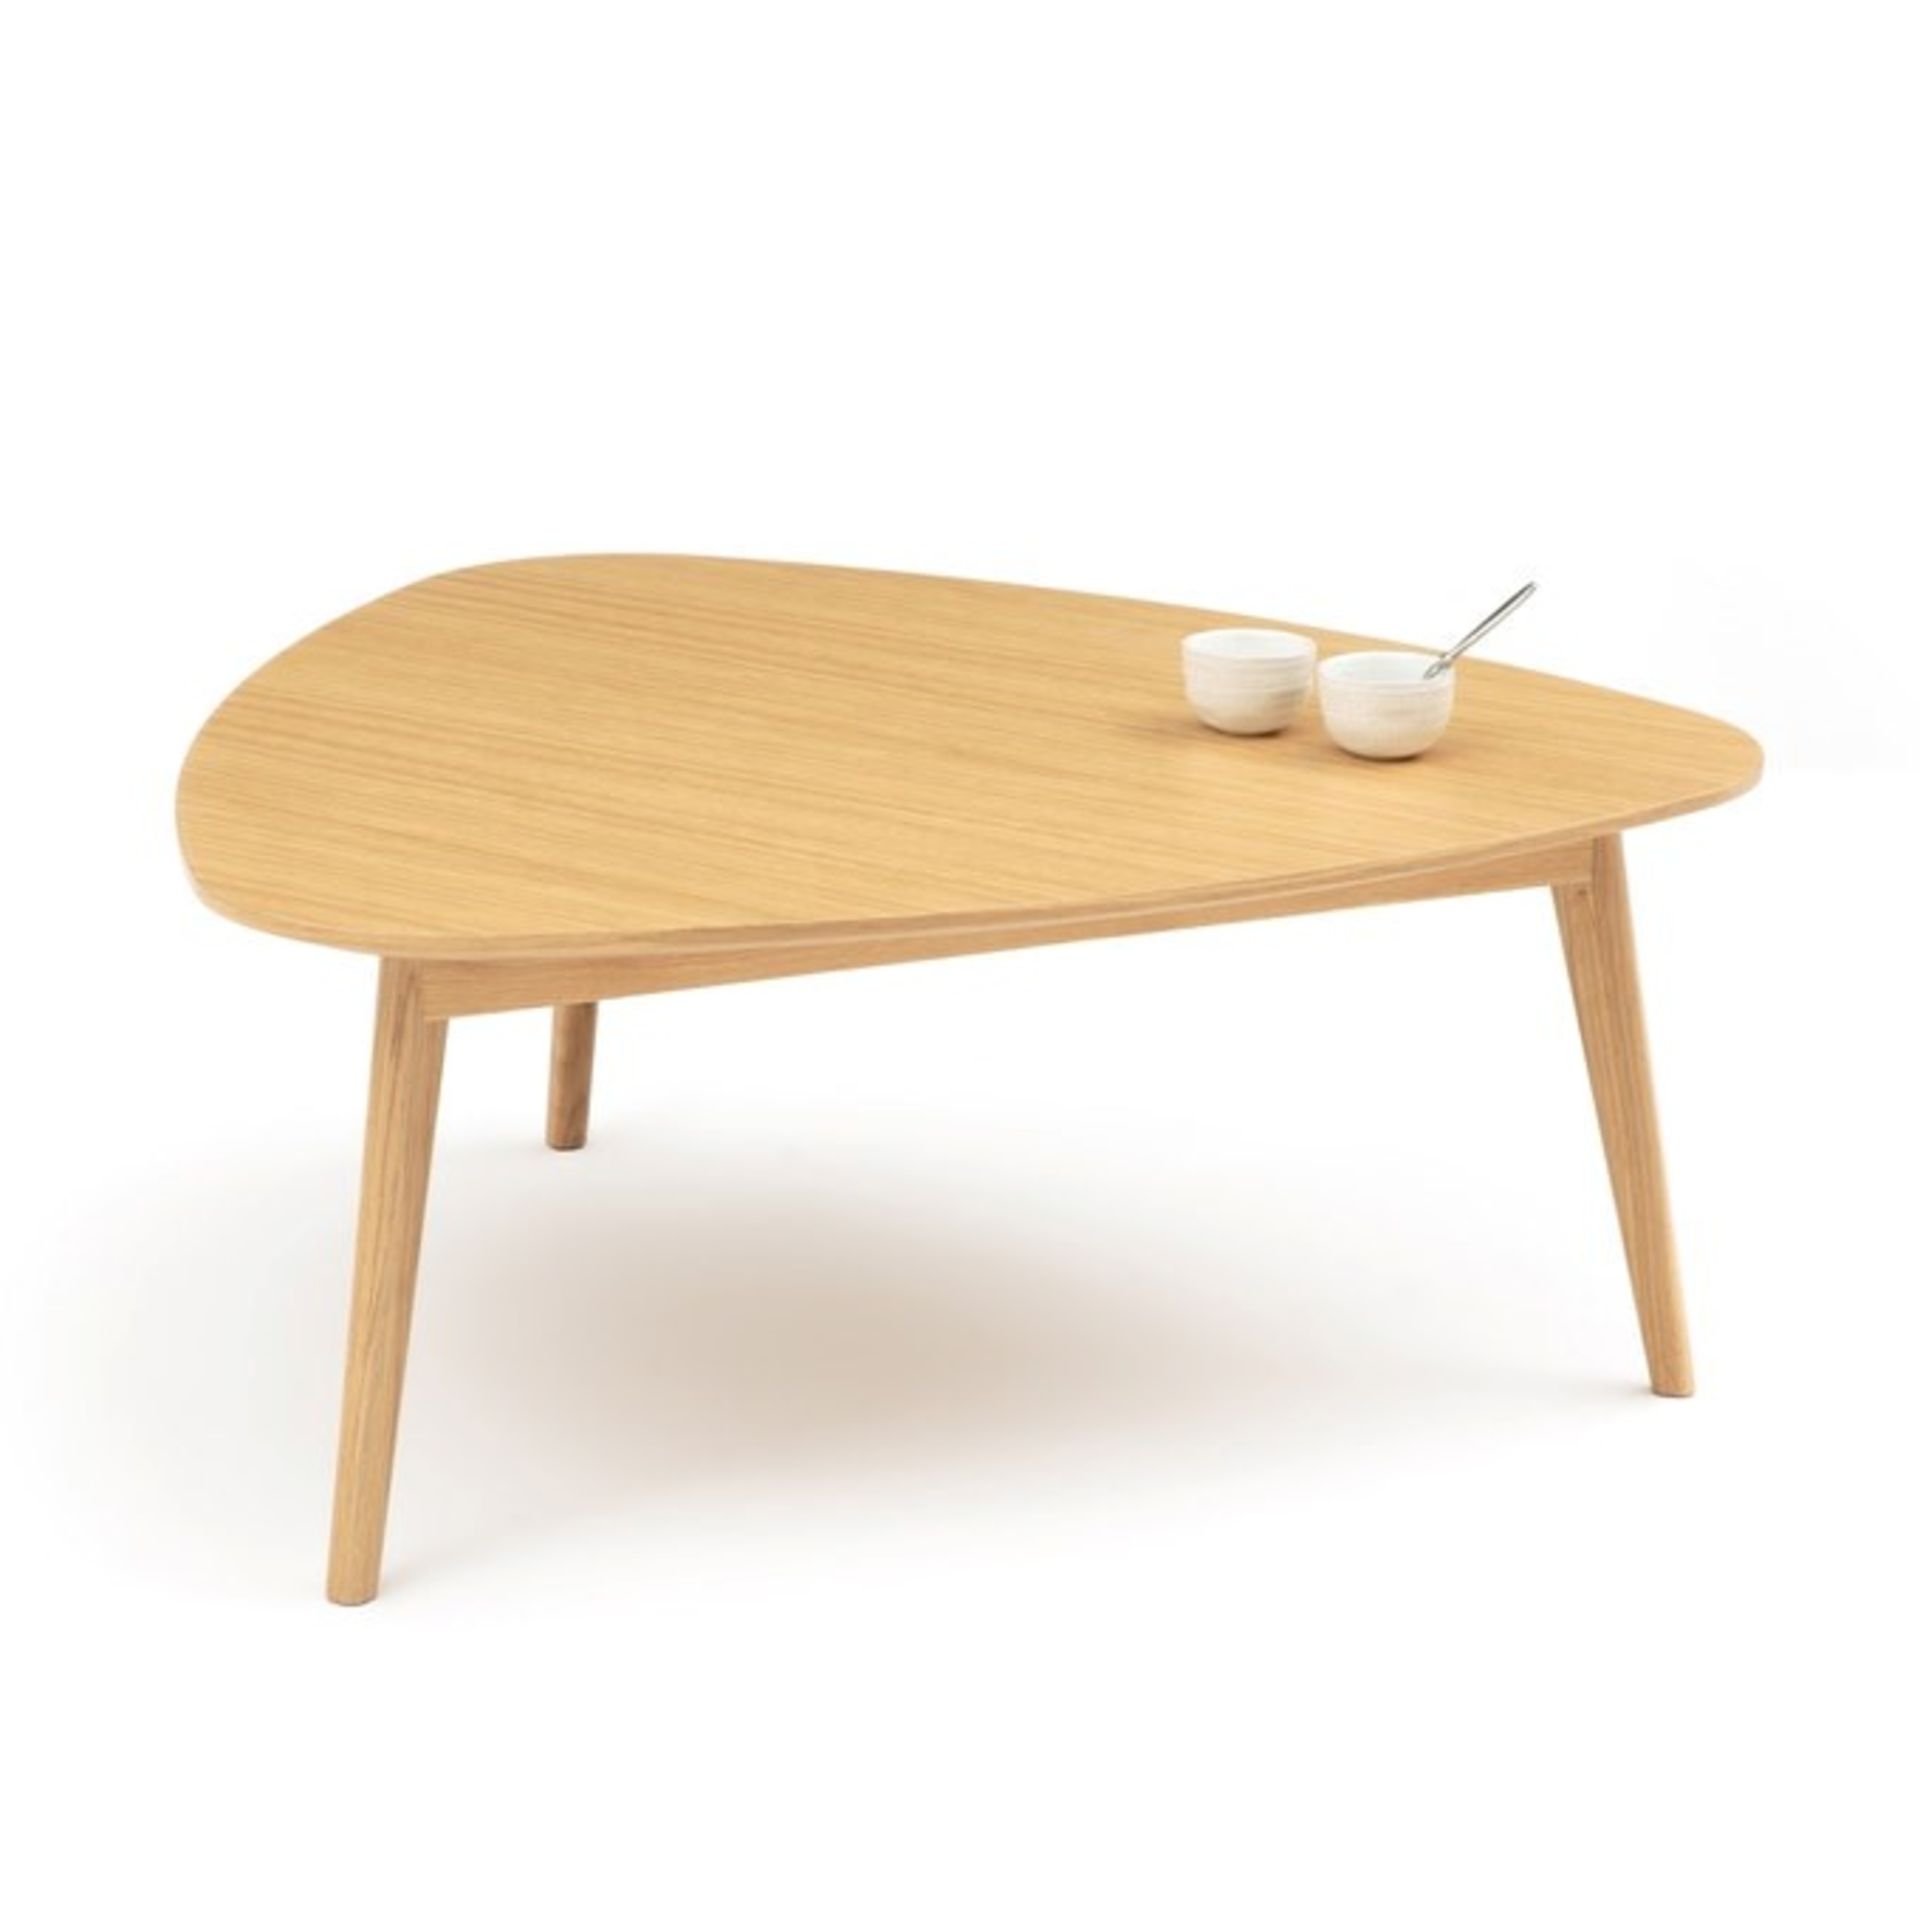 1 GRADE B BOXED DESIGNER COFFEE TABLE IN OAK / RRP £325.00 (PUBLIC VIEWING AVAILABLE)